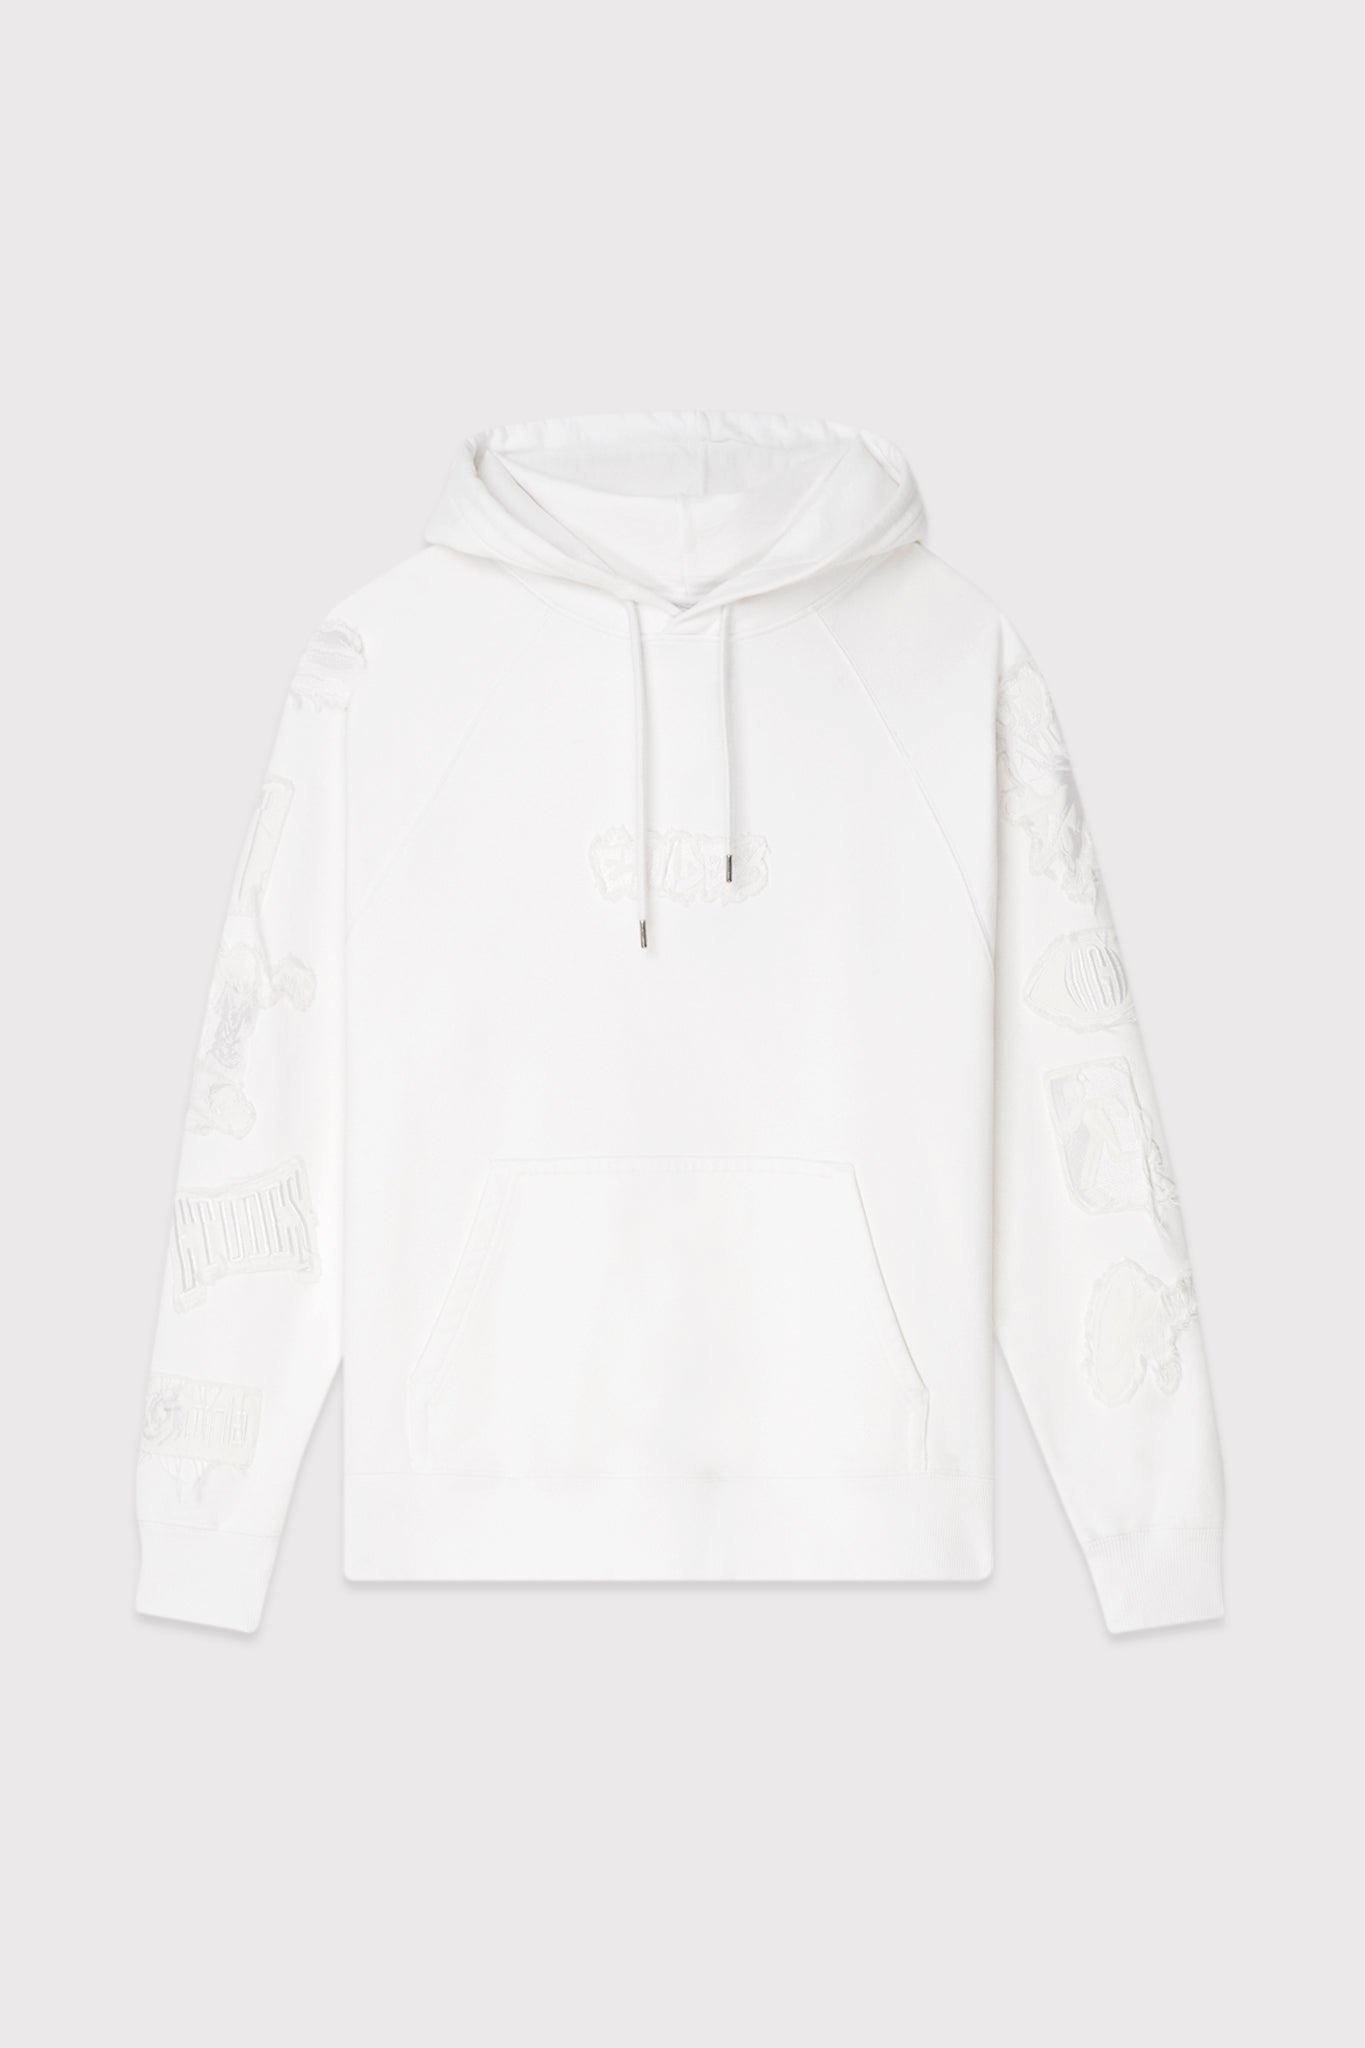 ÉTUDES RACING WITH PATCHES WHITE SWEATSHIRTS 1